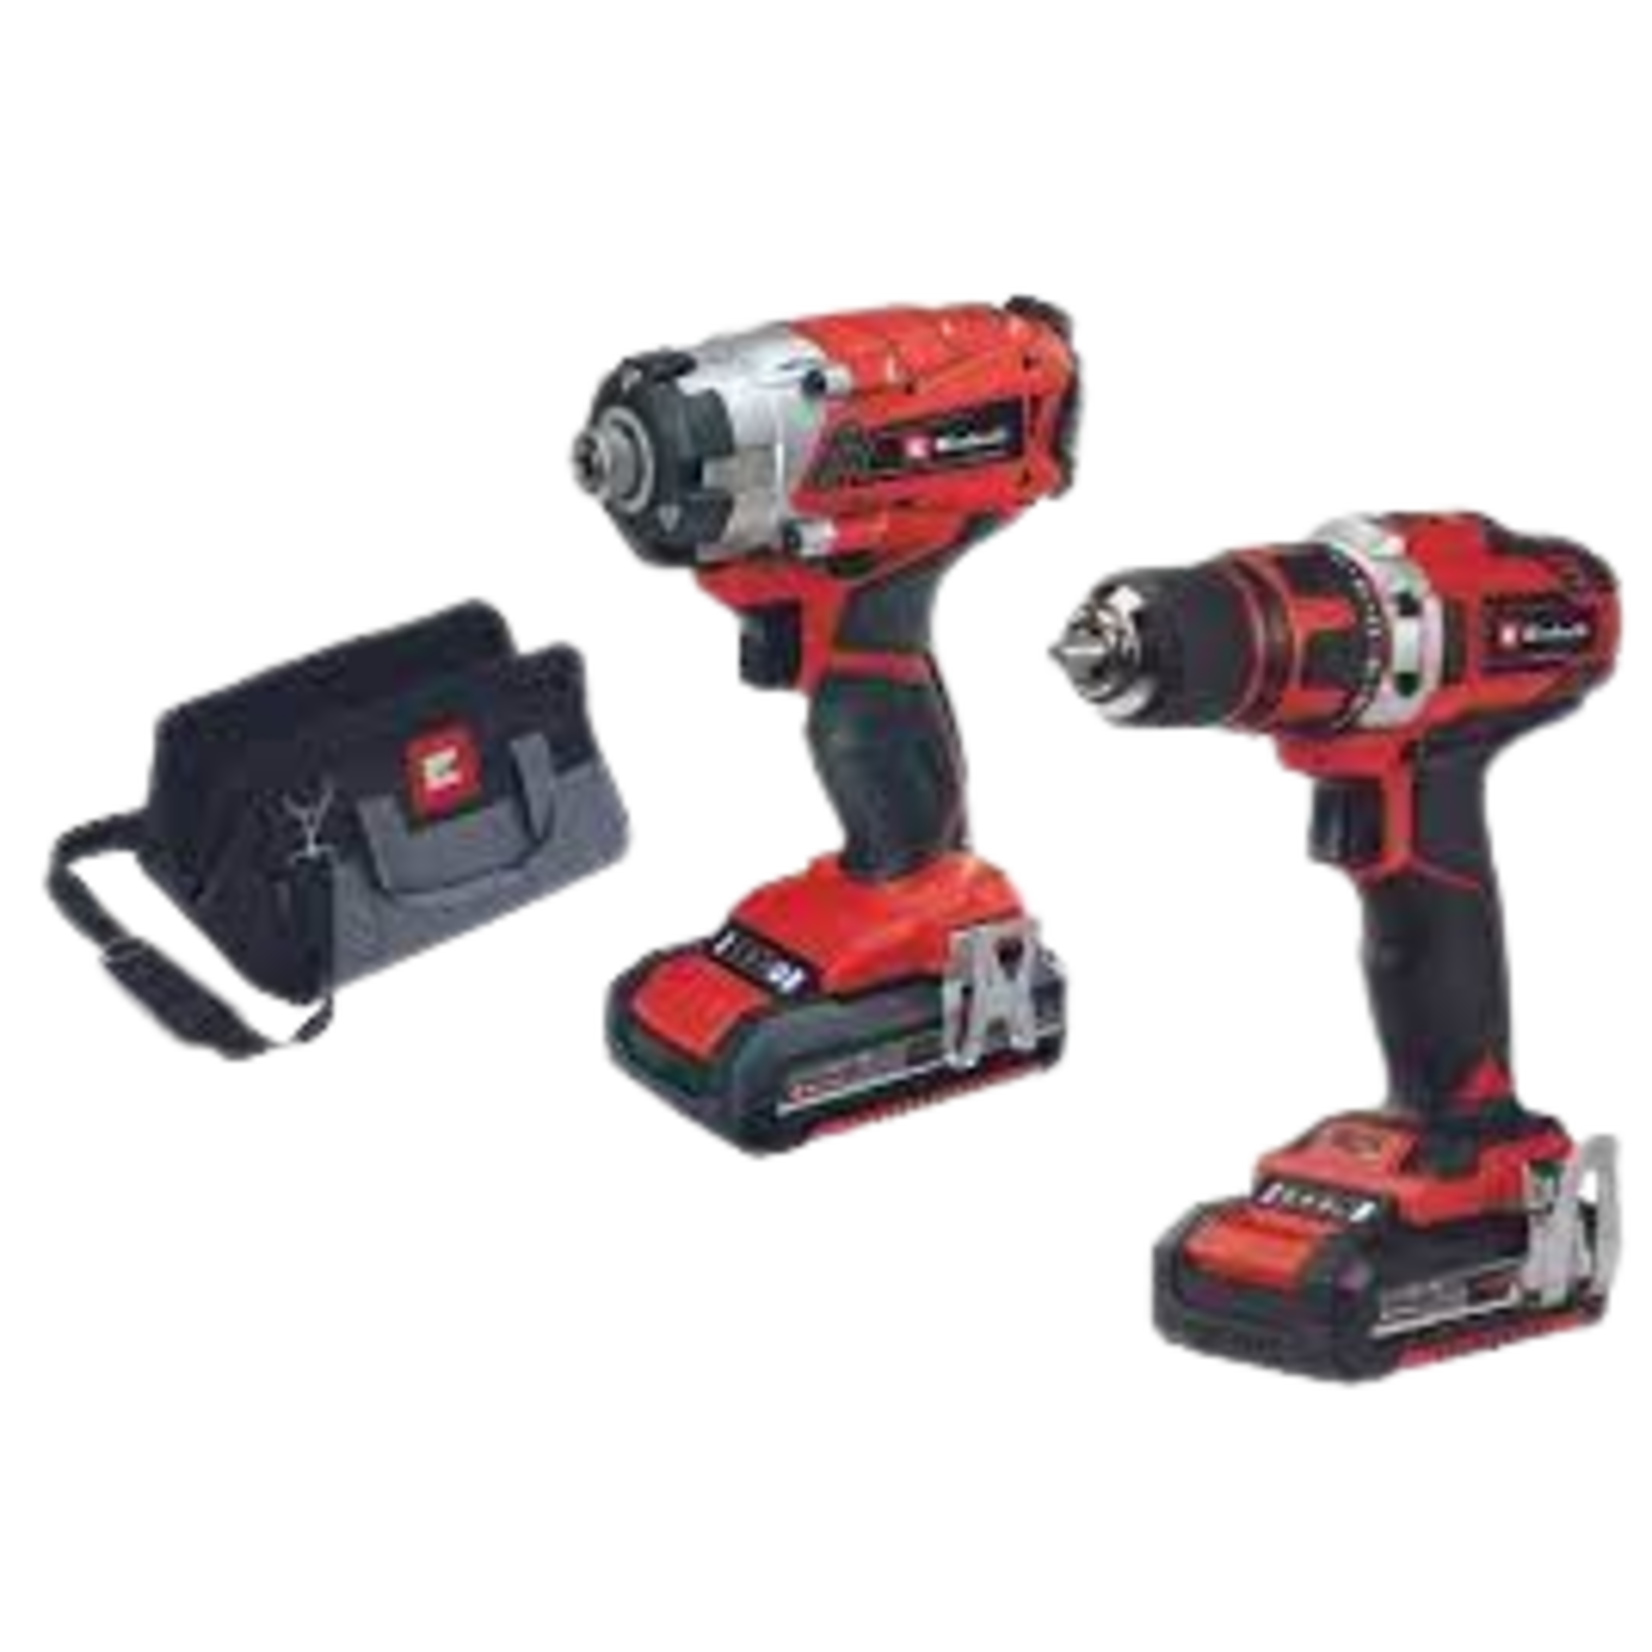 EINHELL 18V CORDLESS 1/2IN DRILL/DRIVER & 1/4IN IMPACT DRIVER KIT